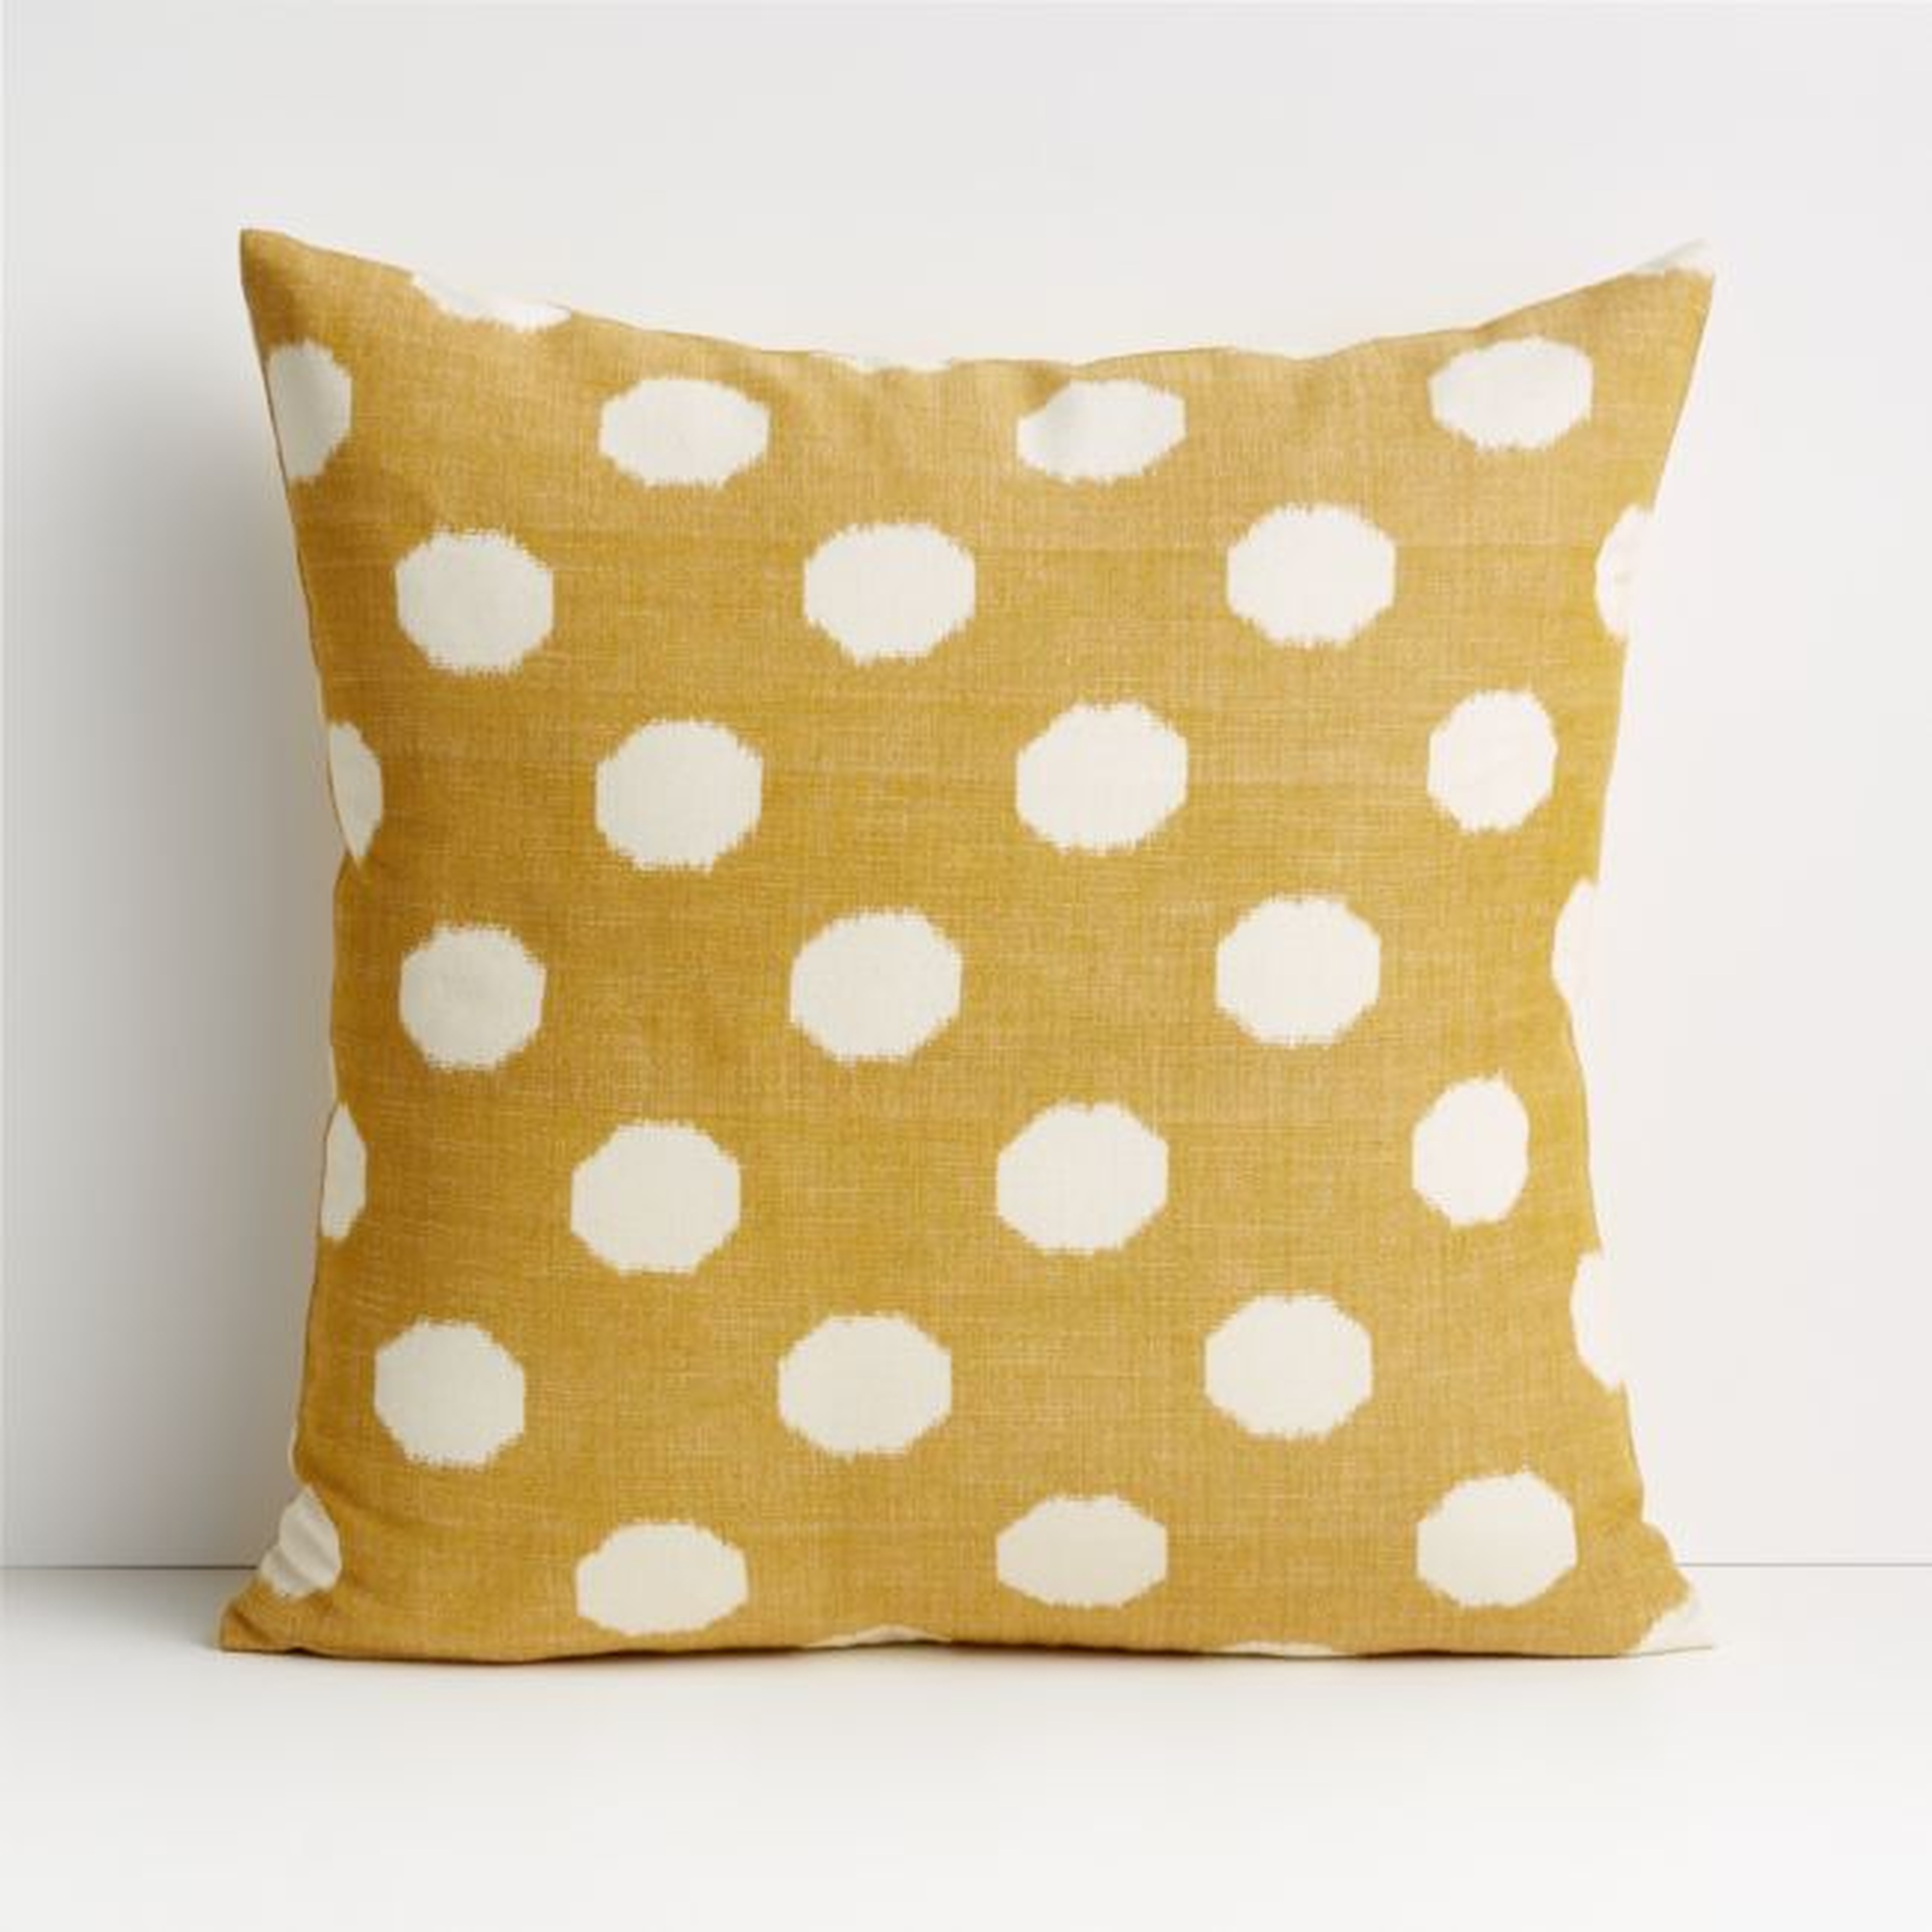 Anellis 20" Golden Yellow Polka Dot Pillow with Down-Alternative Insert - Crate and Barrel